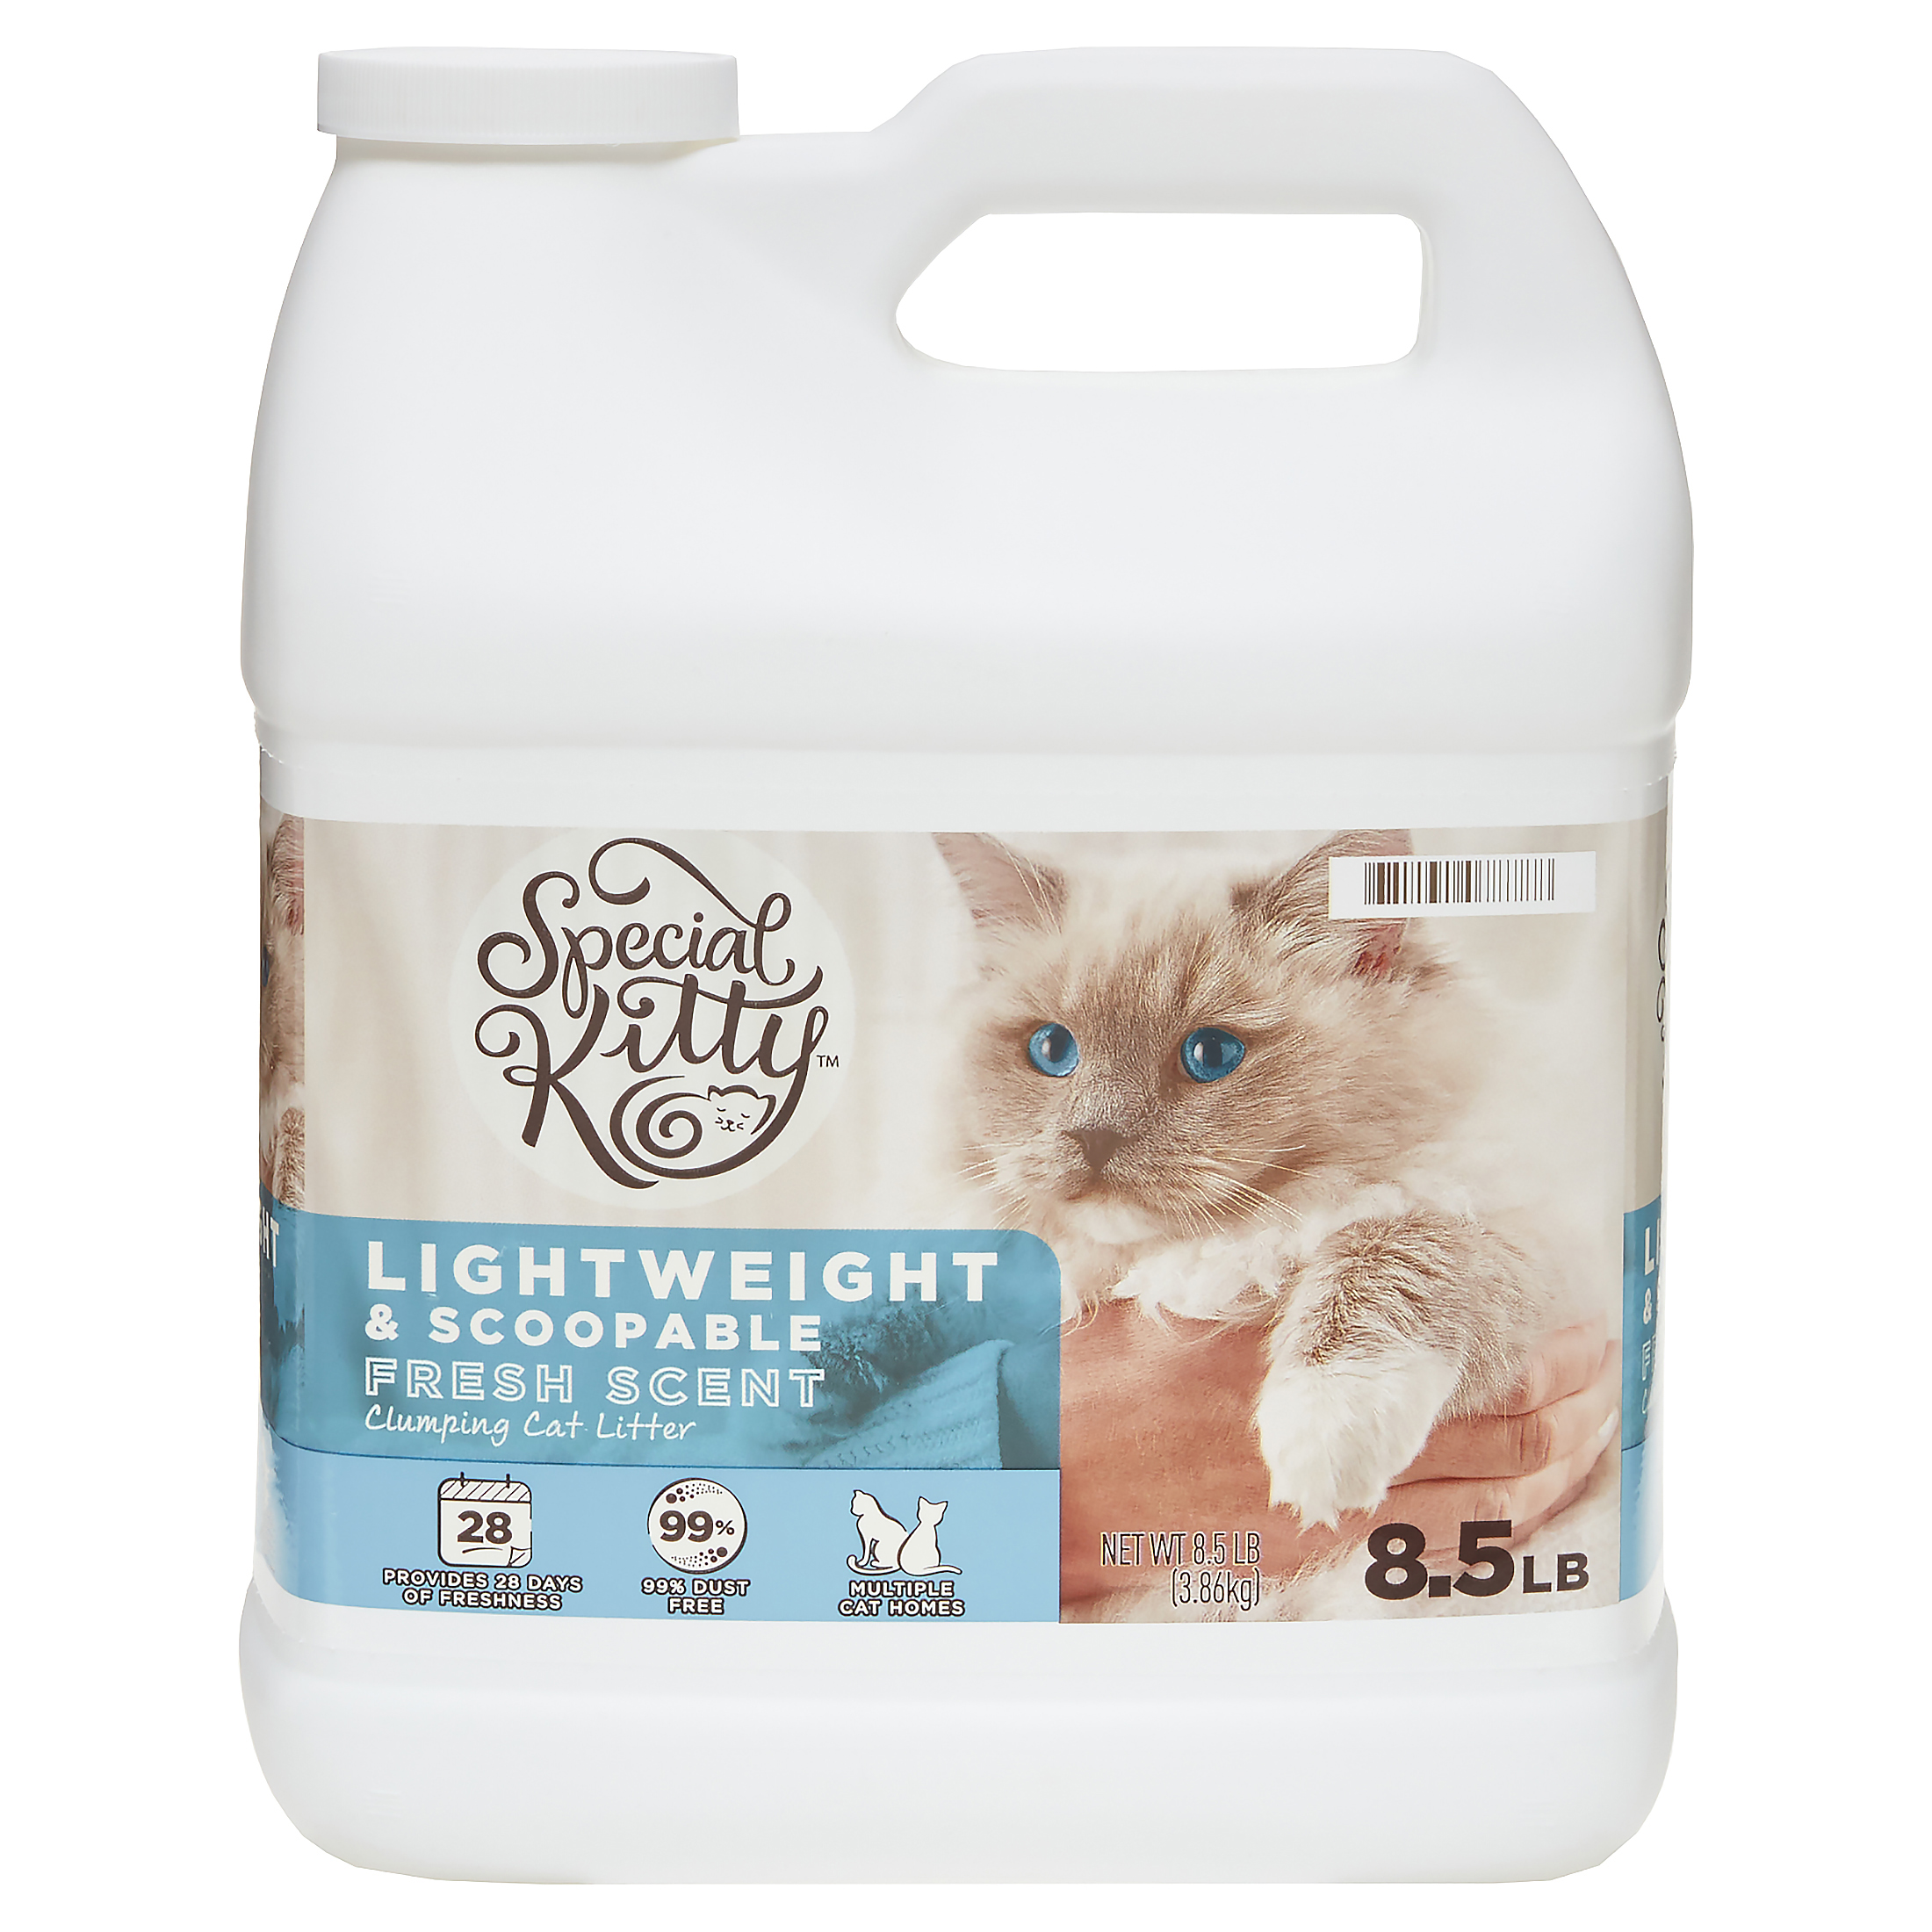 Special Kitty Lightweight & Scoopable Clumping Cat Litter, Fresh Scent, 8.5 lb - image 1 of 7